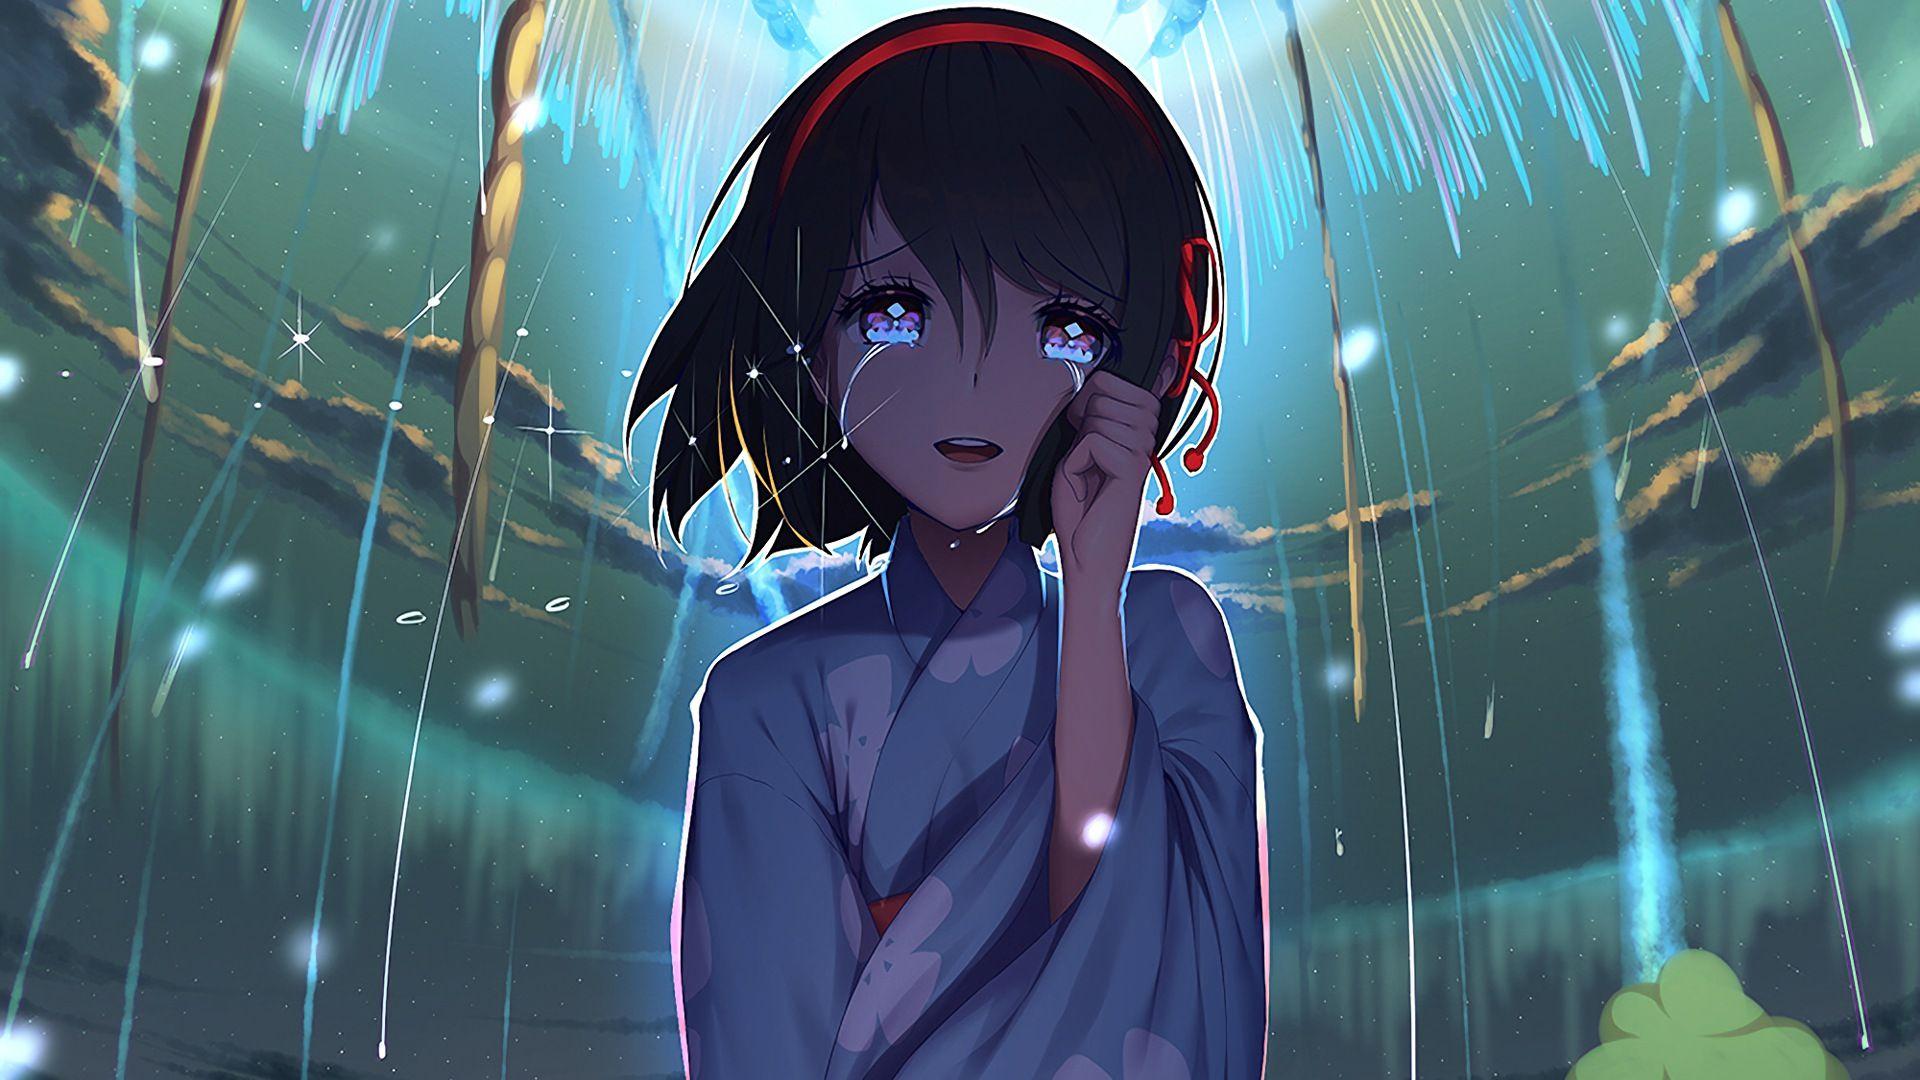 Crying Anime Wallpapers - Top Free Crying Anime Backgrounds ...